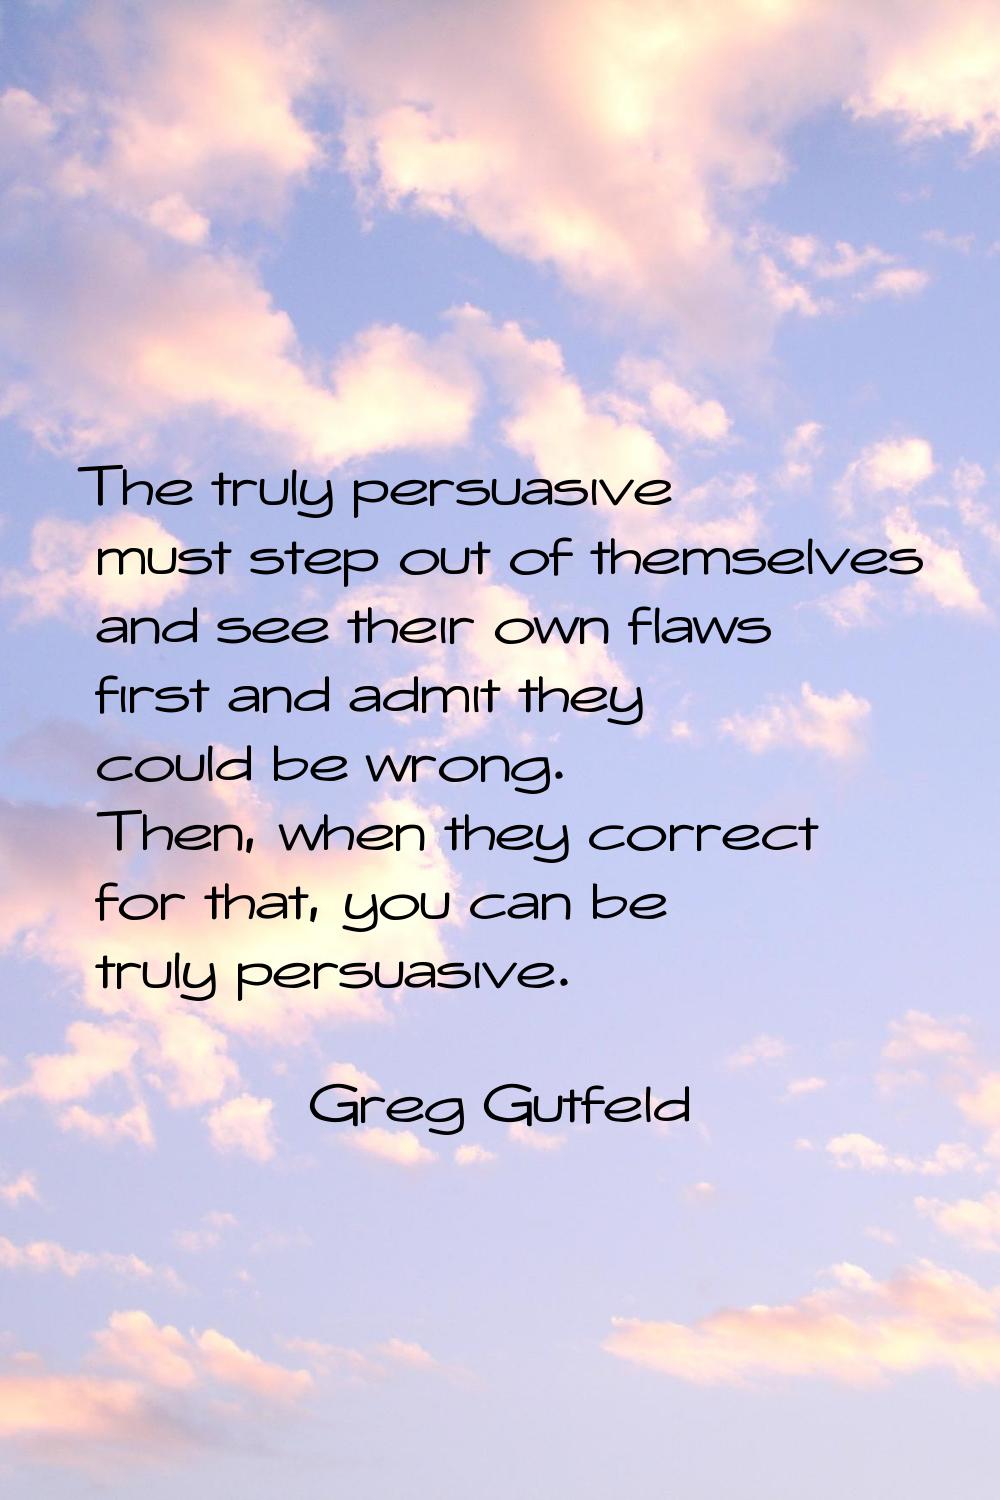 The truly persuasive must step out of themselves and see their own flaws first and admit they could